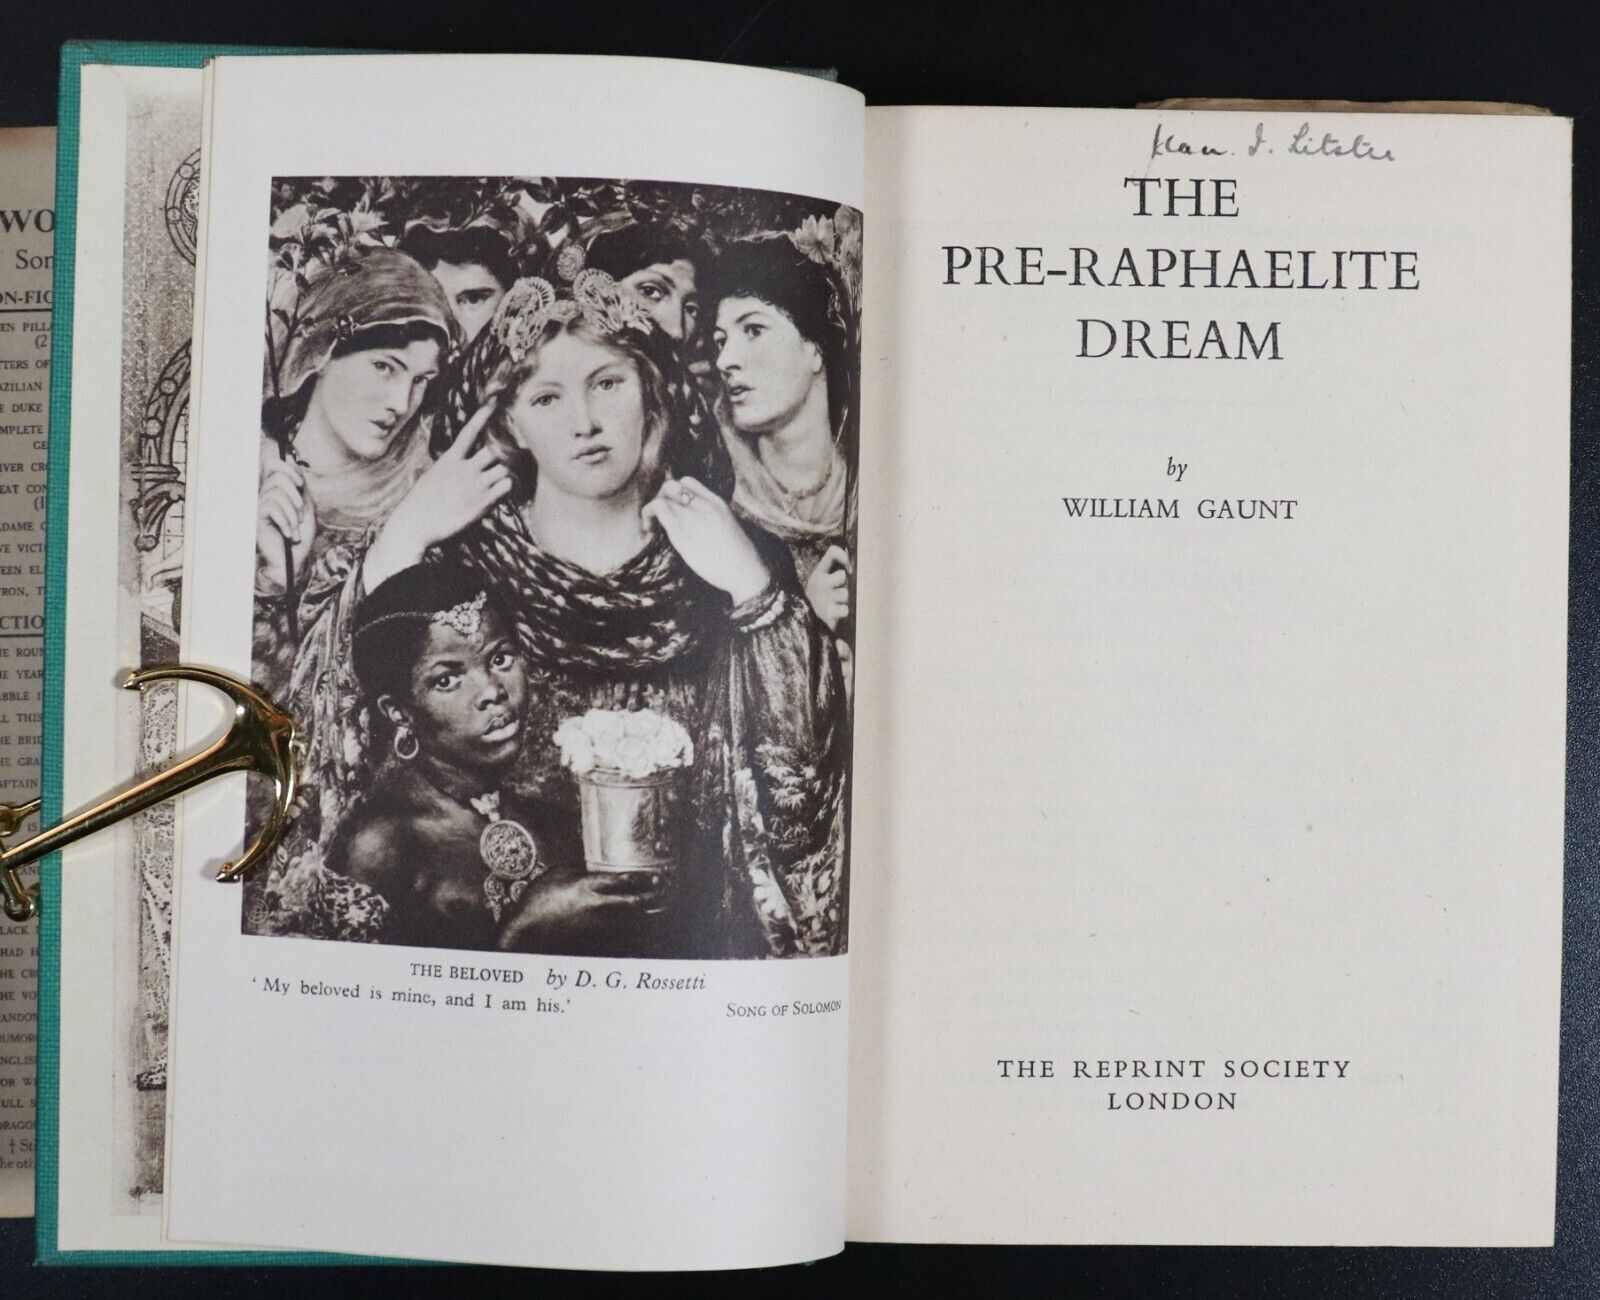 1943 The Pre-Raphaelite Dream by William Guant Art History Book Illustrated